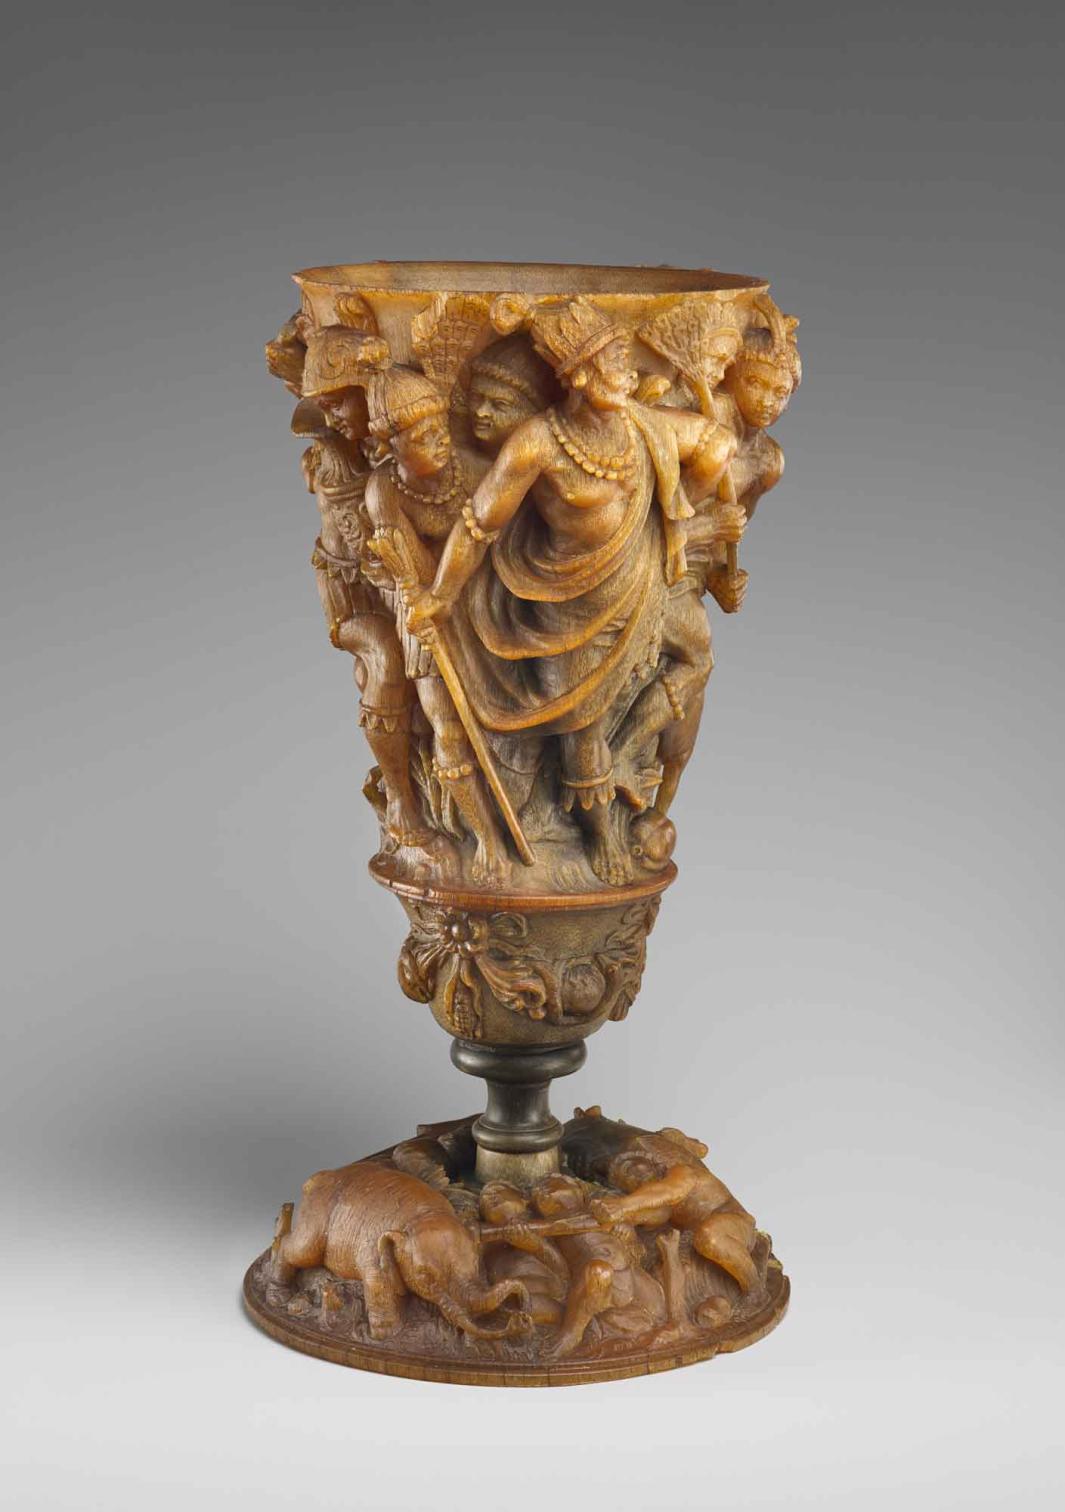 View of carved cup made out of rhinoceros horn